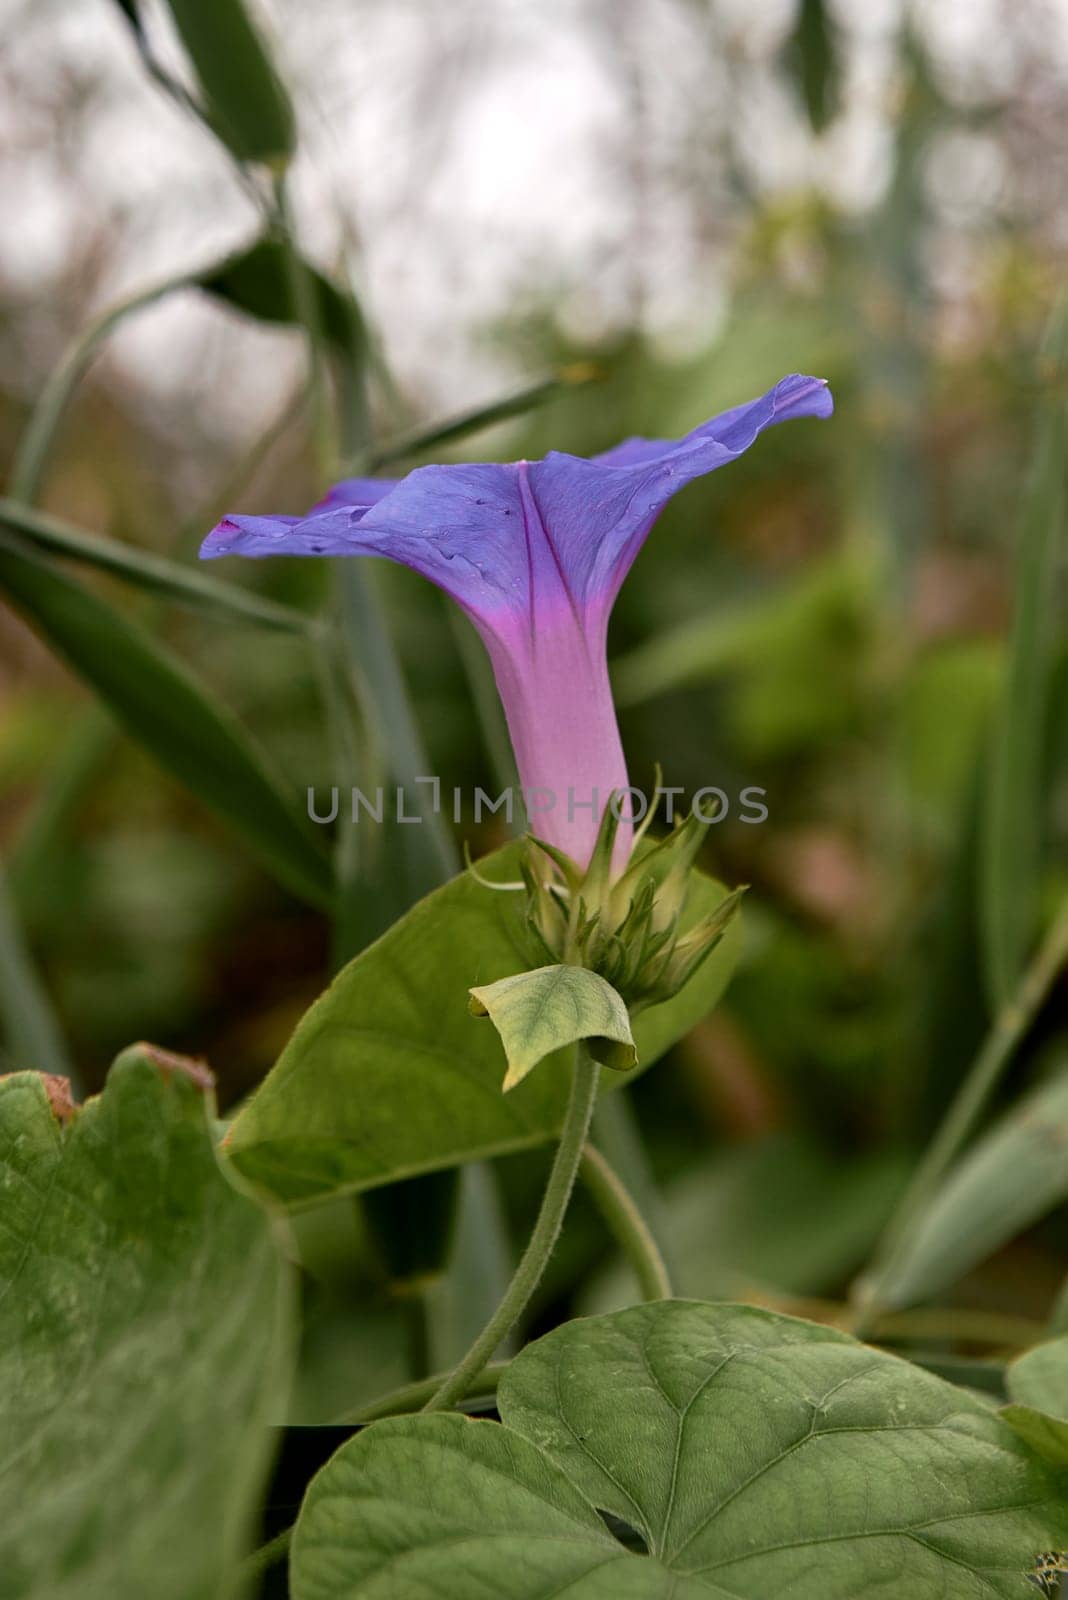 Purple bluebell flower on leaves, background out of focus.Detail photography, macro, flower parts, green leaves, branches. Ipomoea purpurea